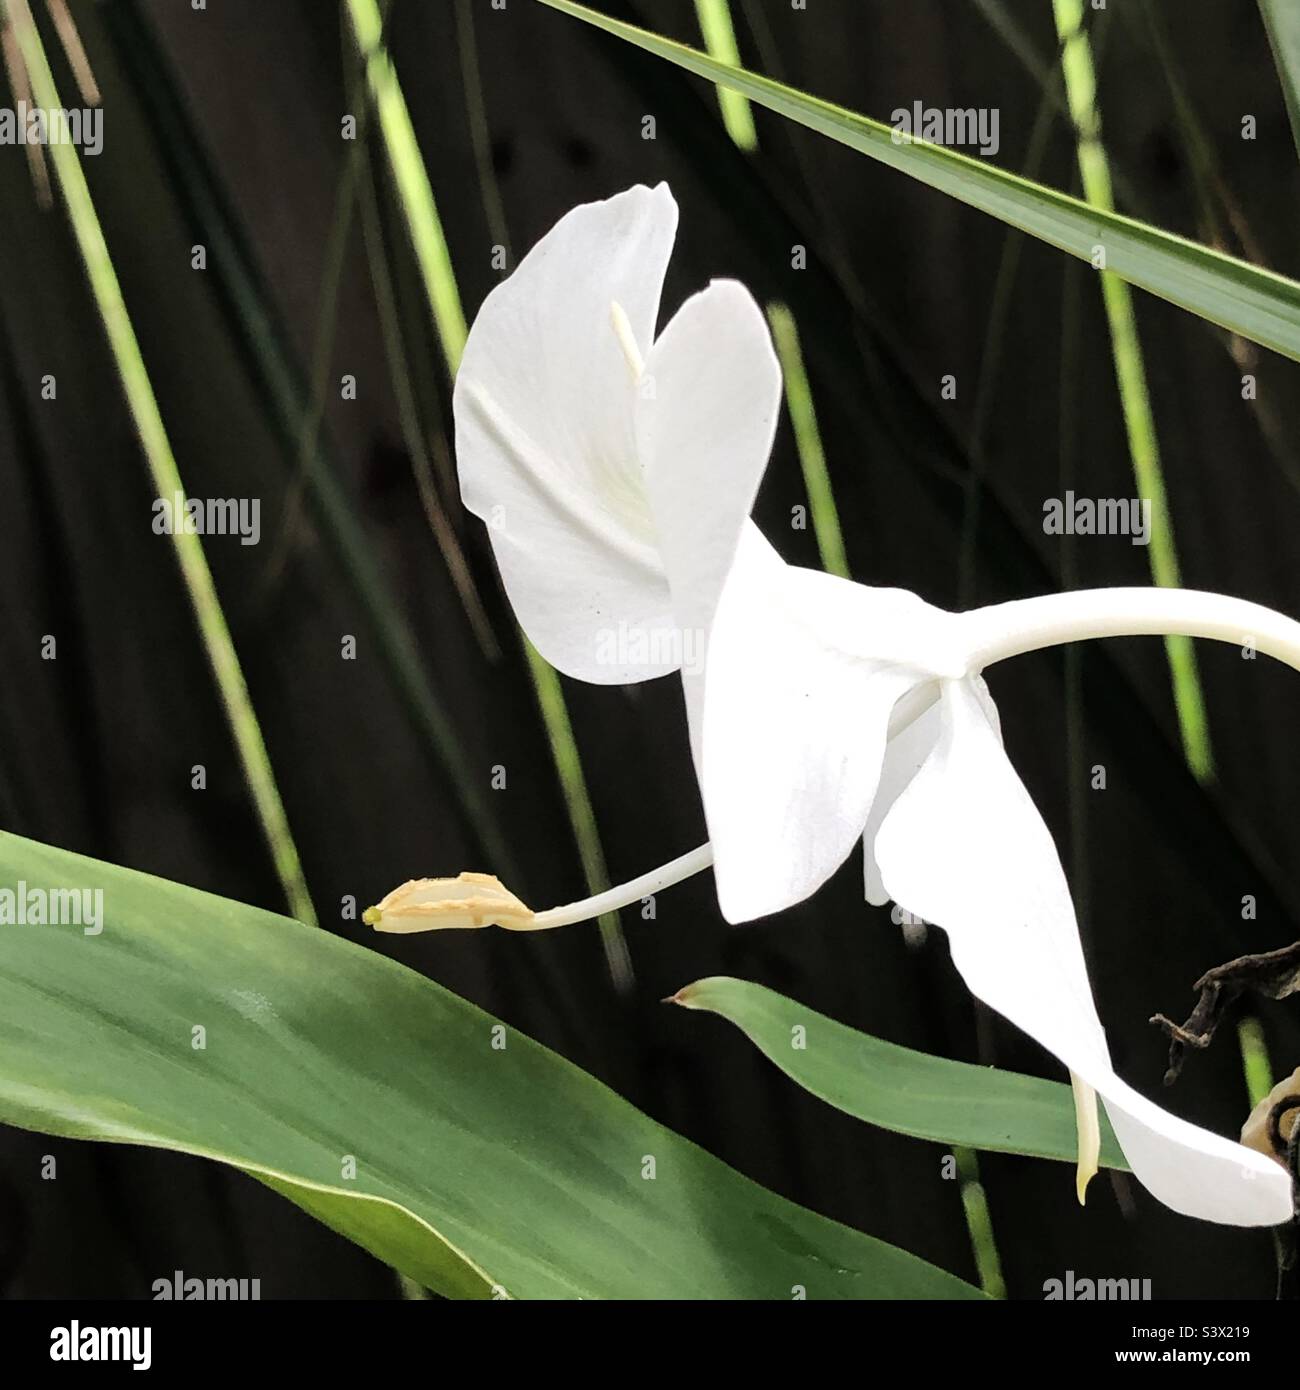 A single  ginger flower head ( Hedychium coronarium) growing in the shade in a Florida garden. These flowers have a beautiful scent. Stock Photo